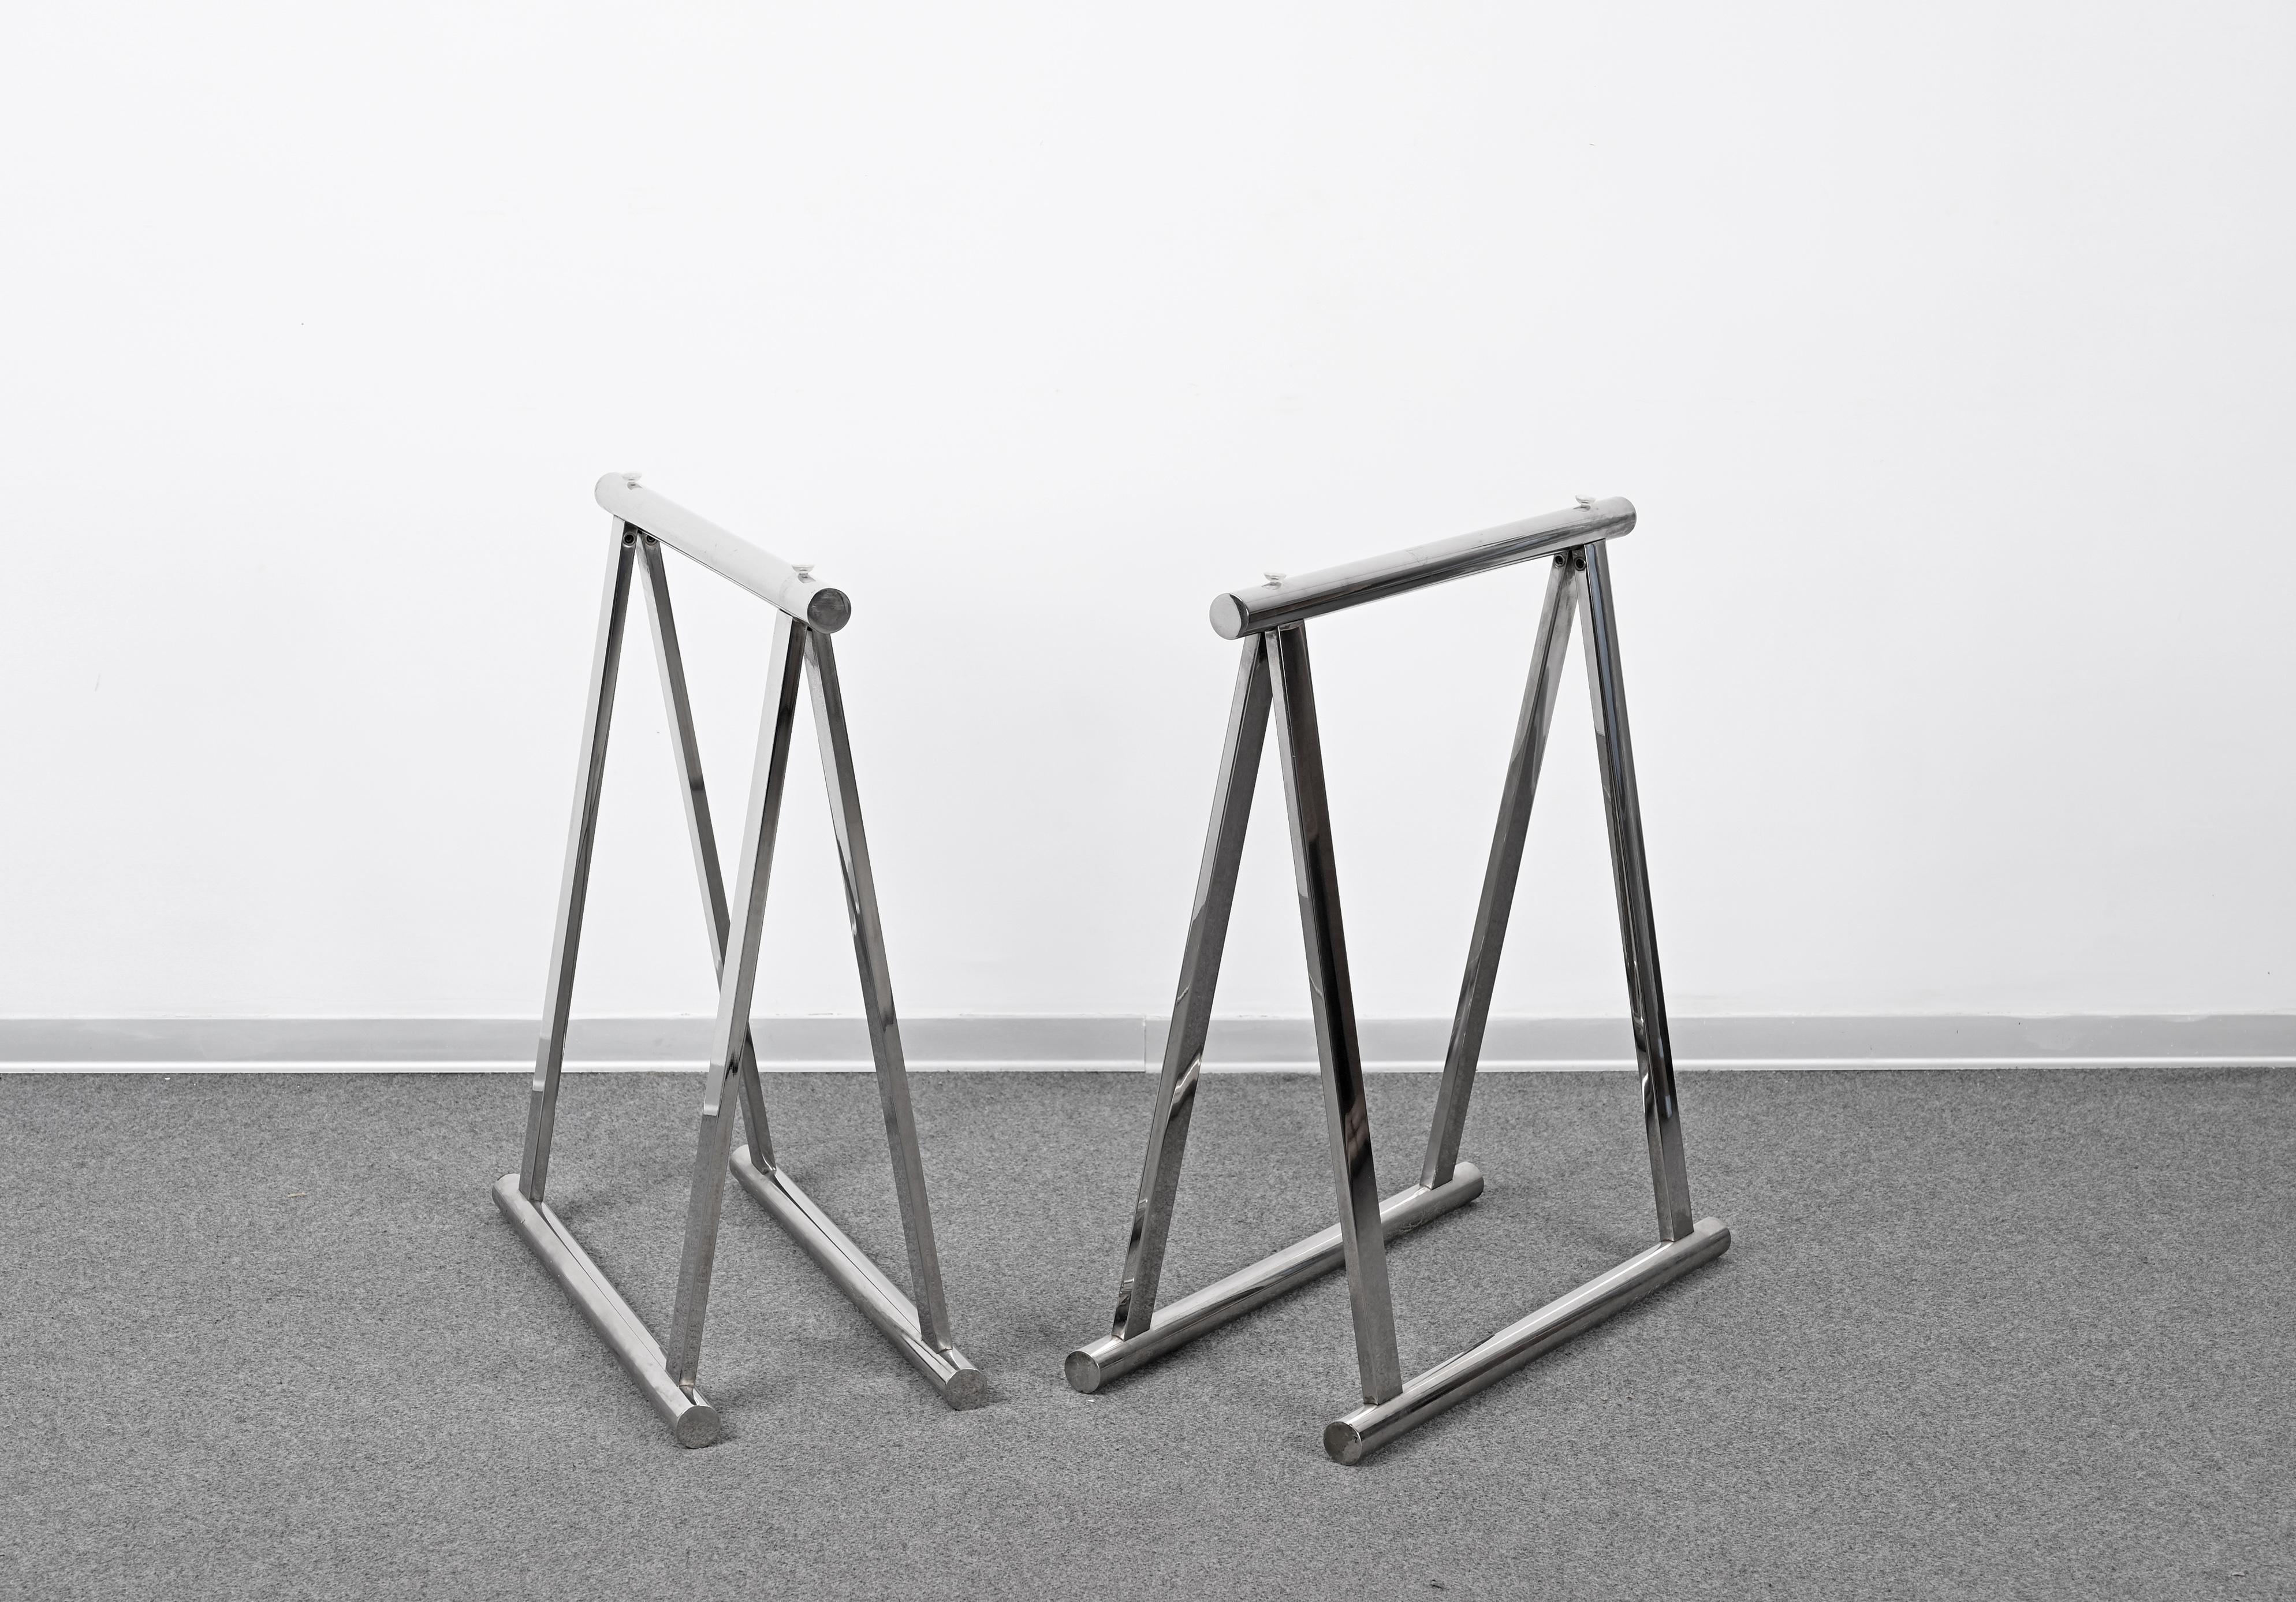 Pair of Midcentury Four-Legs Chromed Steel Italian Trestles After Baughman 1970s For Sale 4